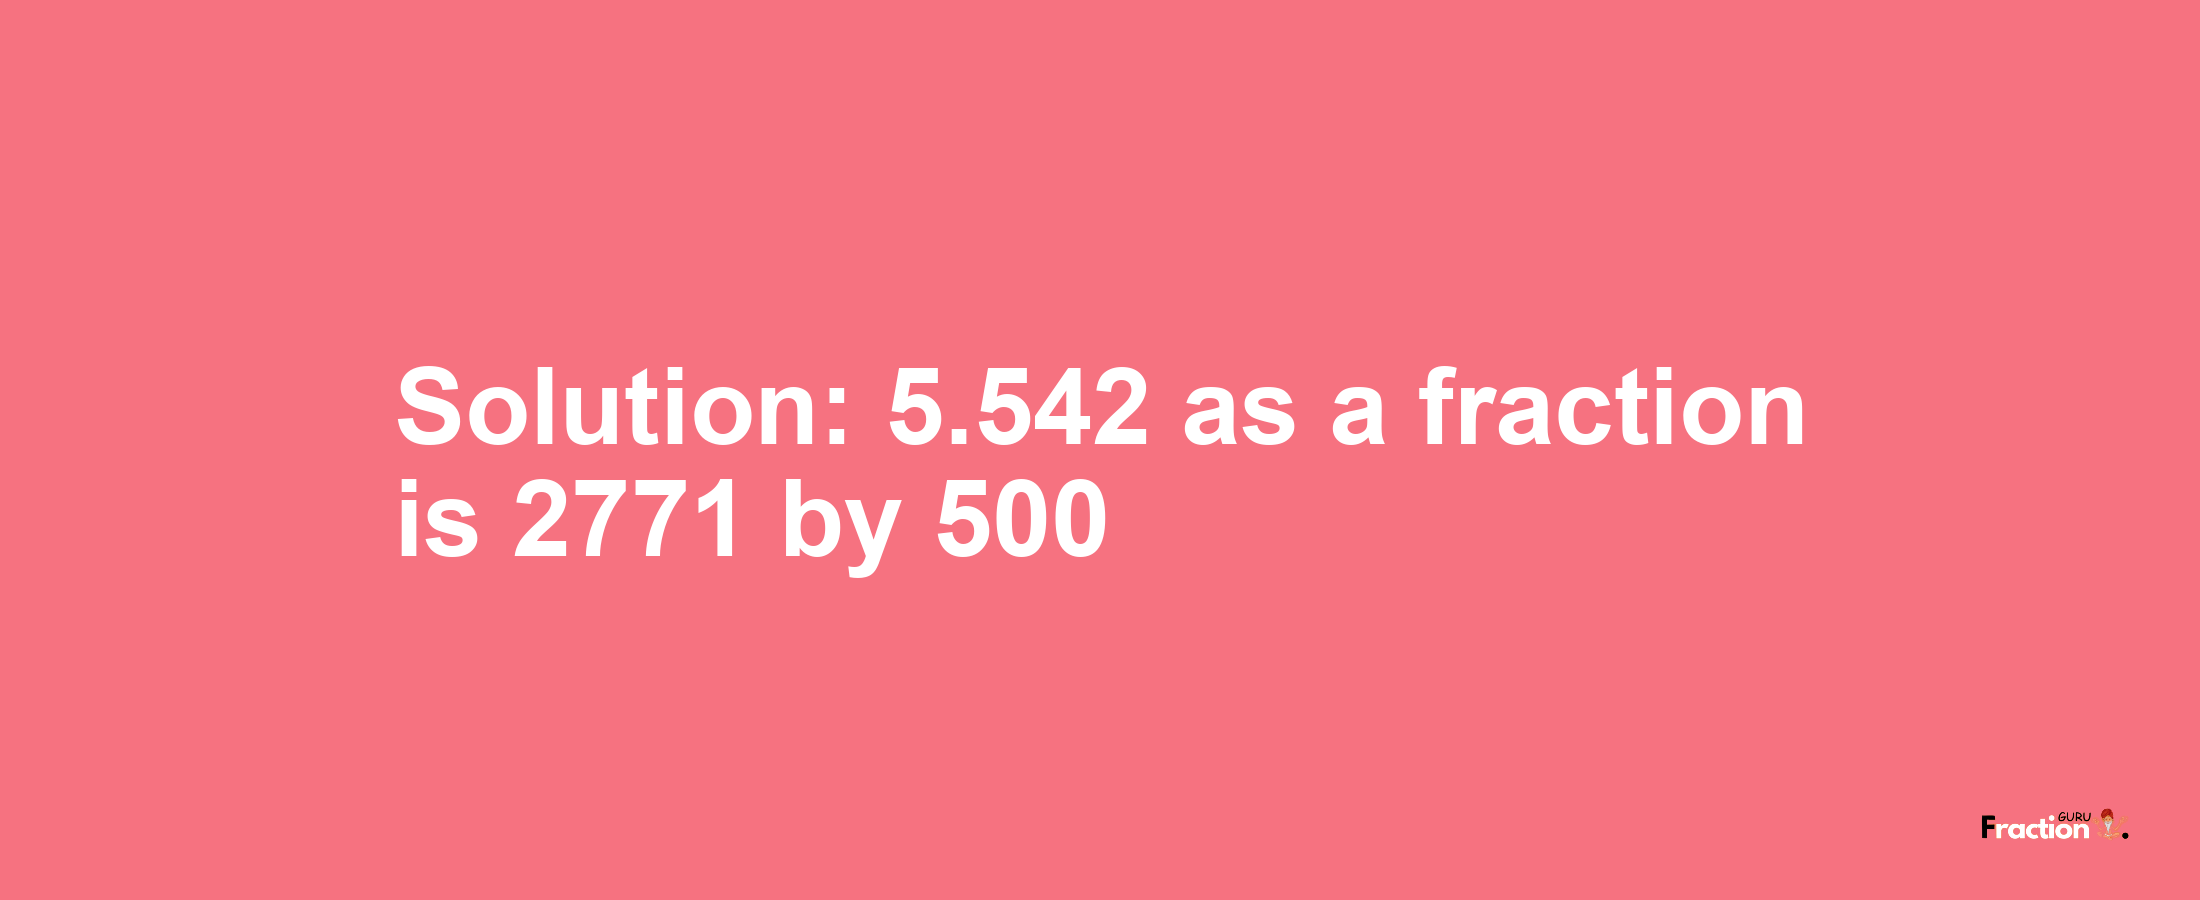 Solution:5.542 as a fraction is 2771/500